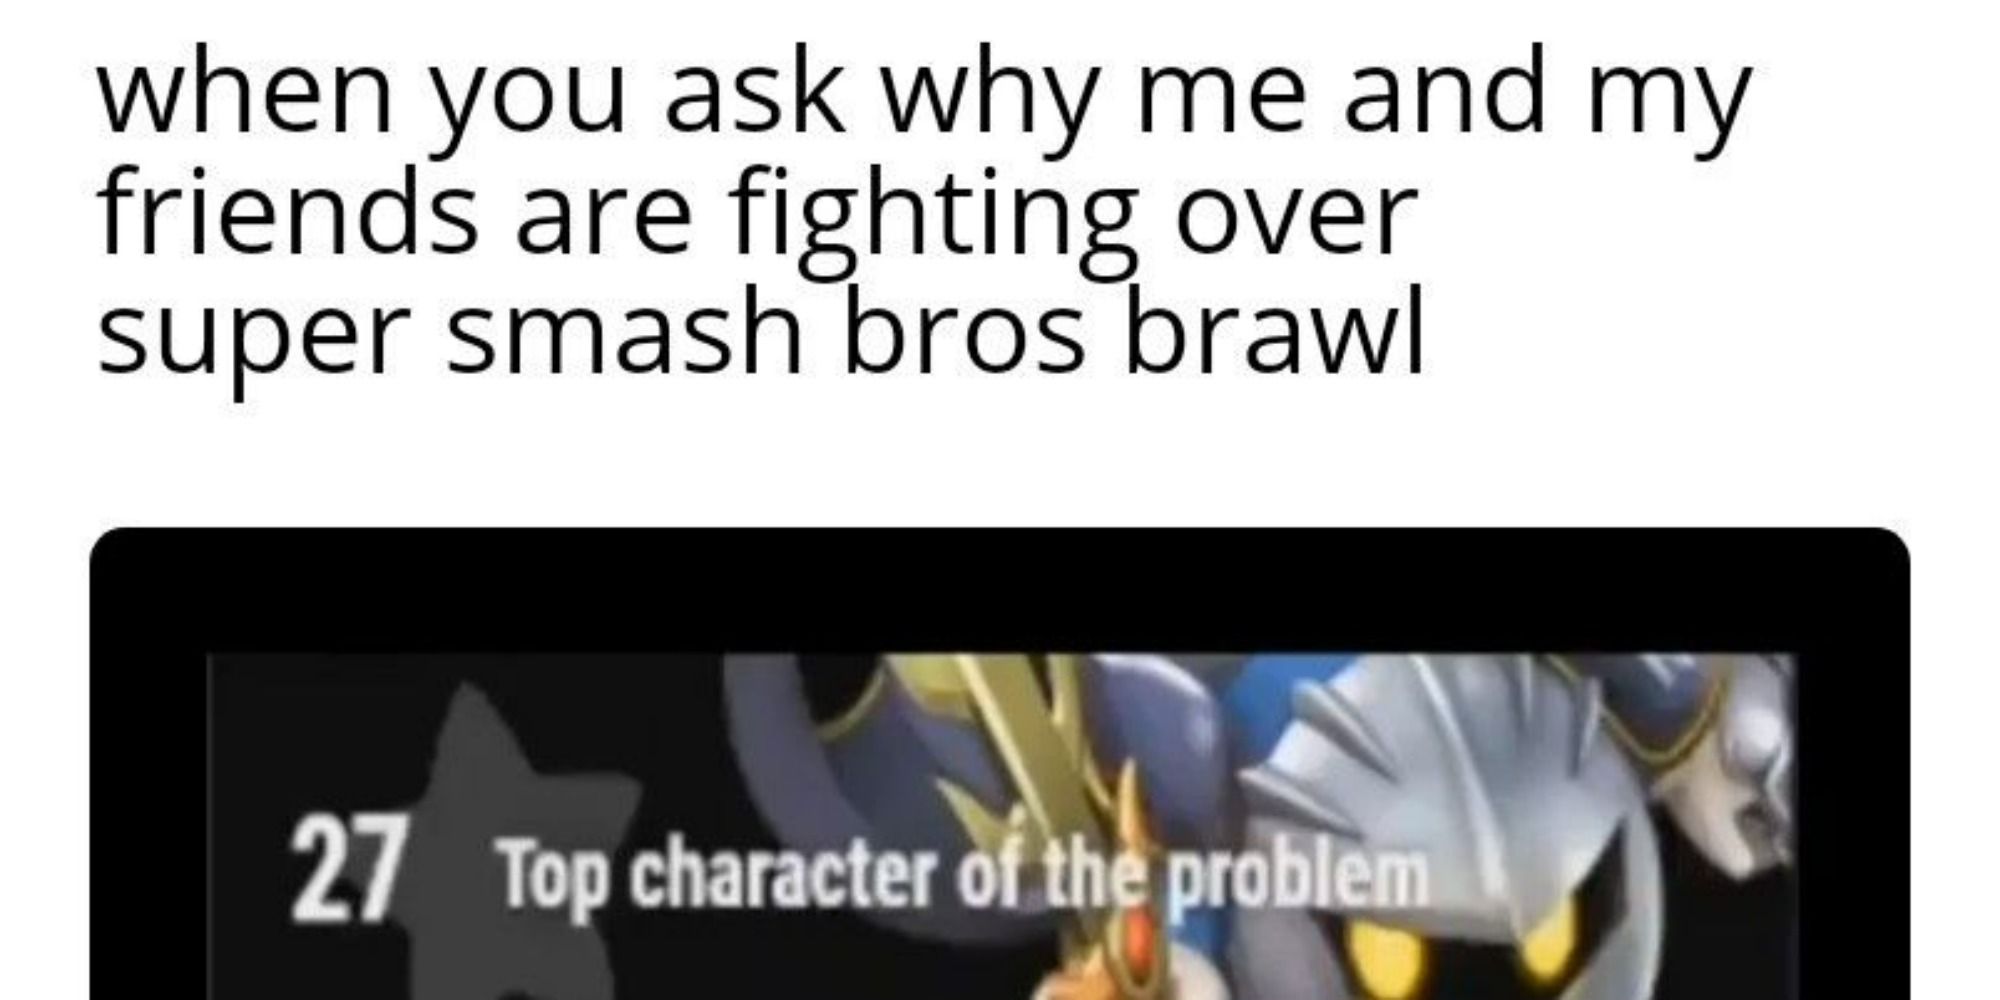 Top Text: when you ask why me and my friends are fighting over smash bros brawl. Bottom image: Meta Knight and Text, "27: Top character of the problem." 